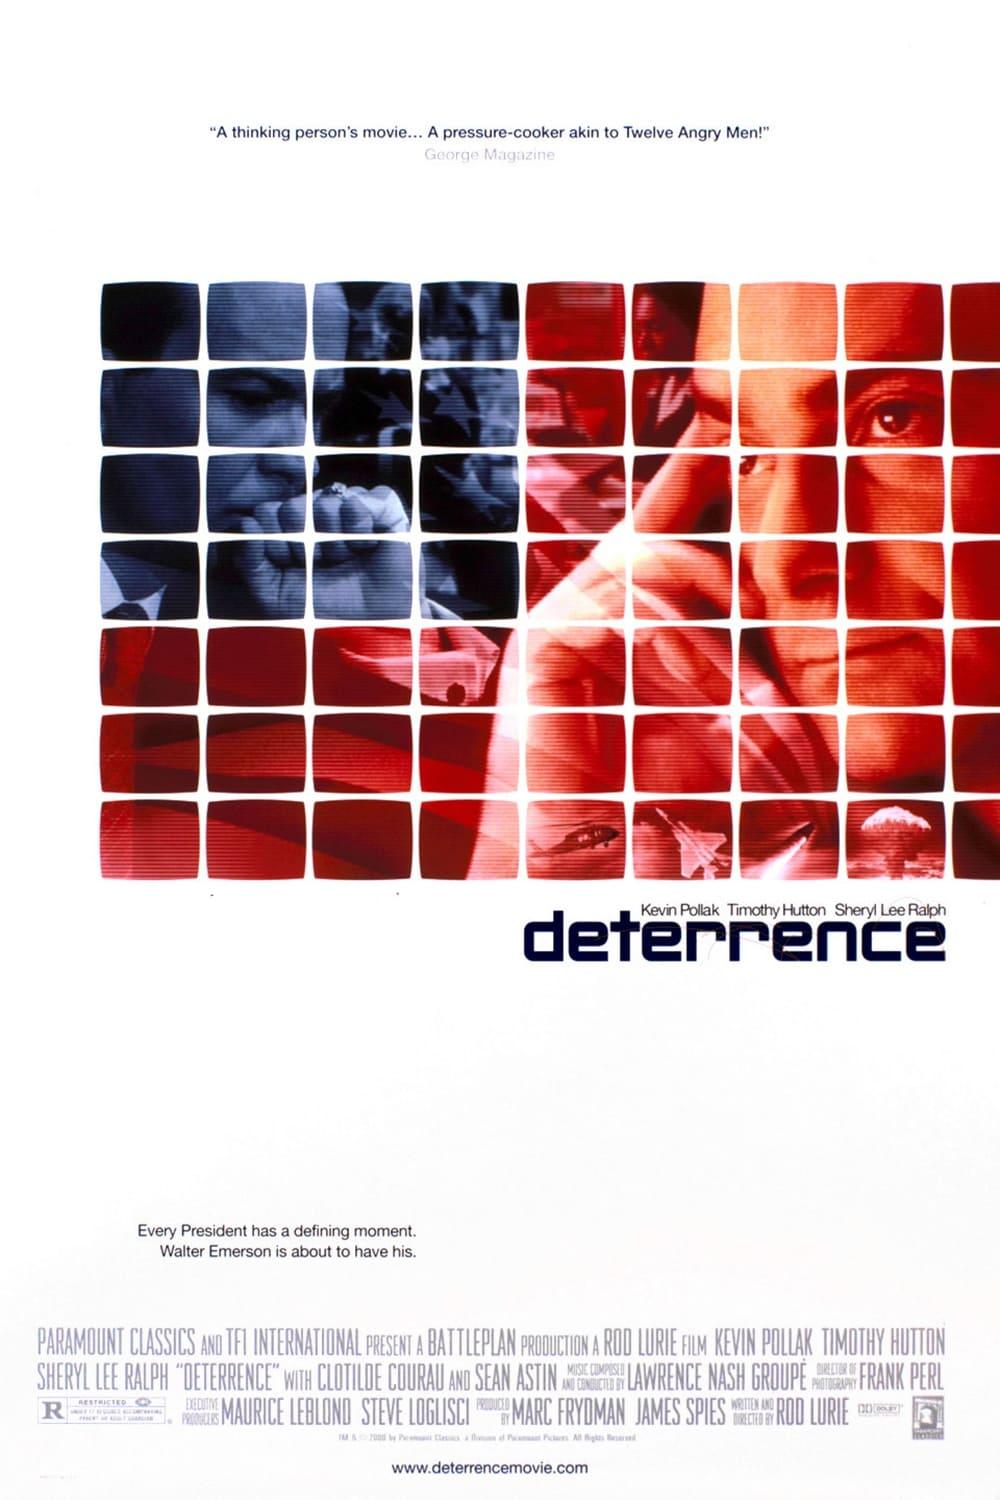 Deterrence poster